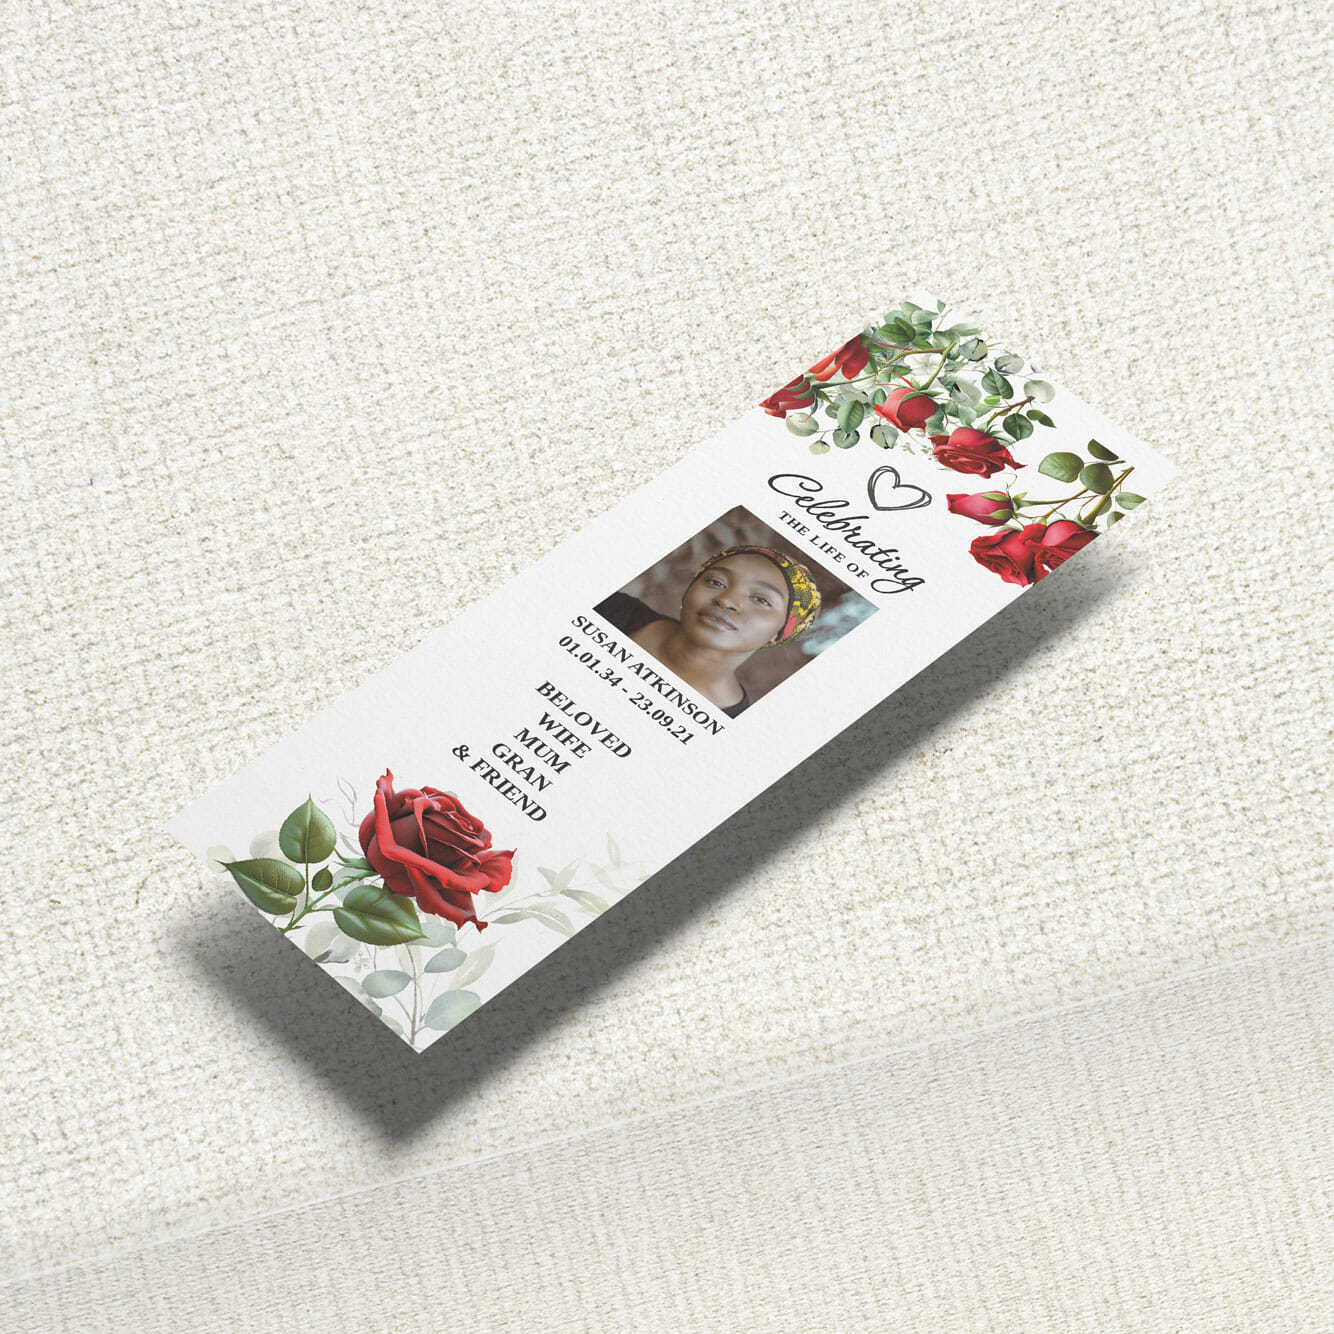 Funeral Bookmark with an elegant orchid design